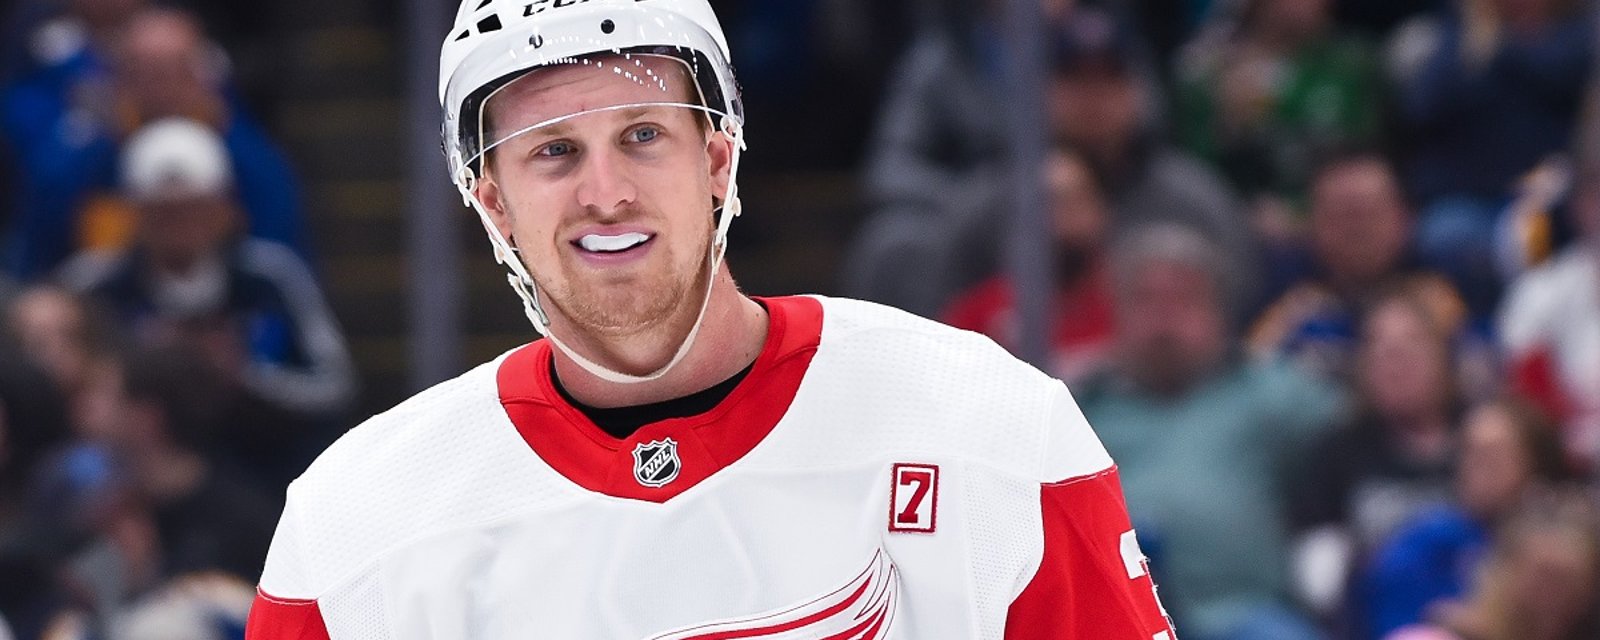 Big update on injured Red Wings forward Anthony Mantha.